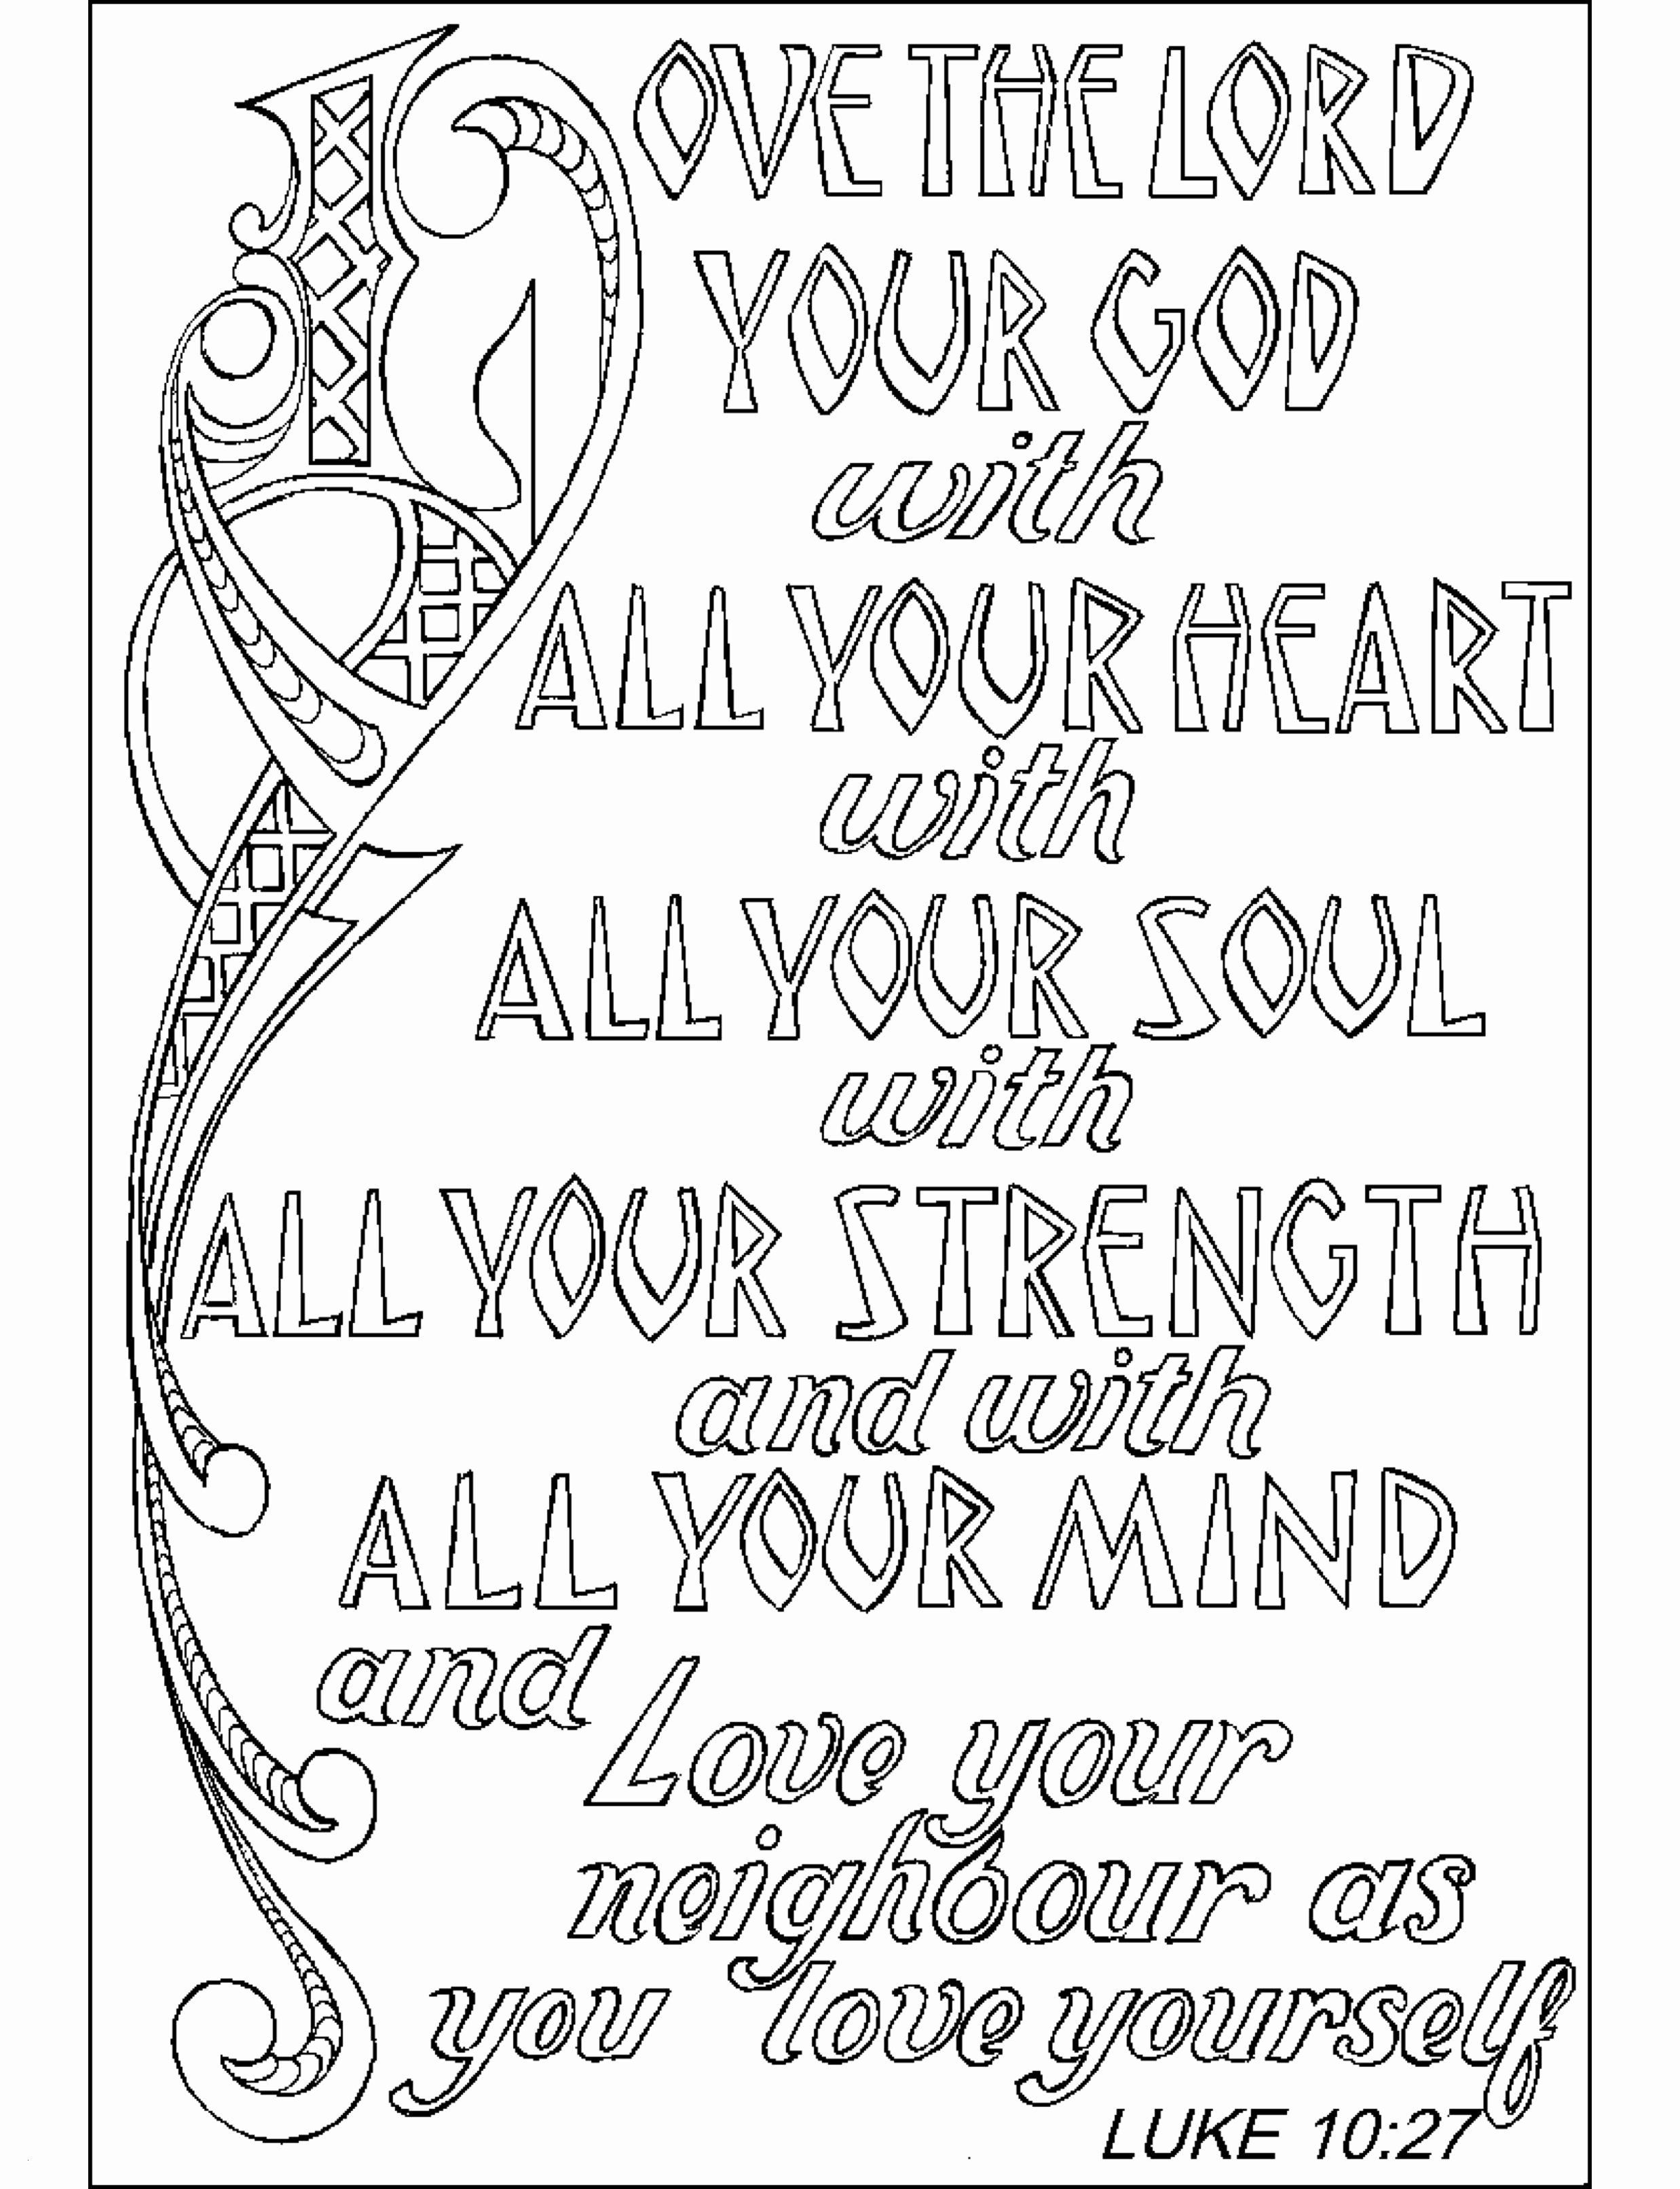 Coloring Pages About The Ten Commandments With Free Printable - Free Printable Ten Commandments Coloring Pages